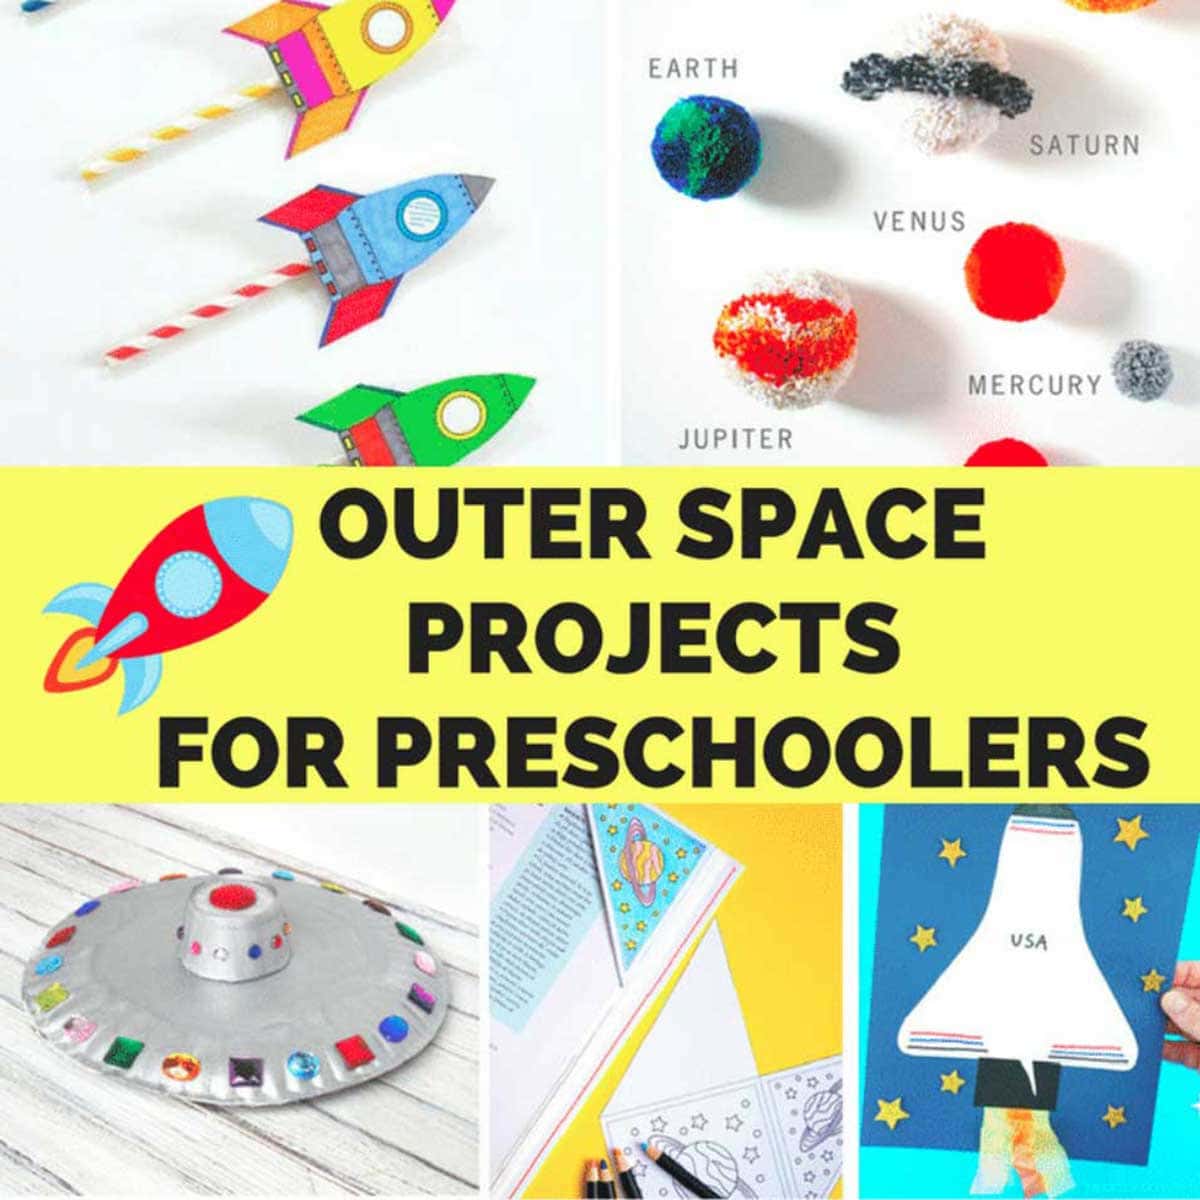 https://brooklynfarmgirl.com/wp-content/uploads/2018/08/Outer-Space-Crafts-for-Preschoolers-Featured-Image-1.jpg